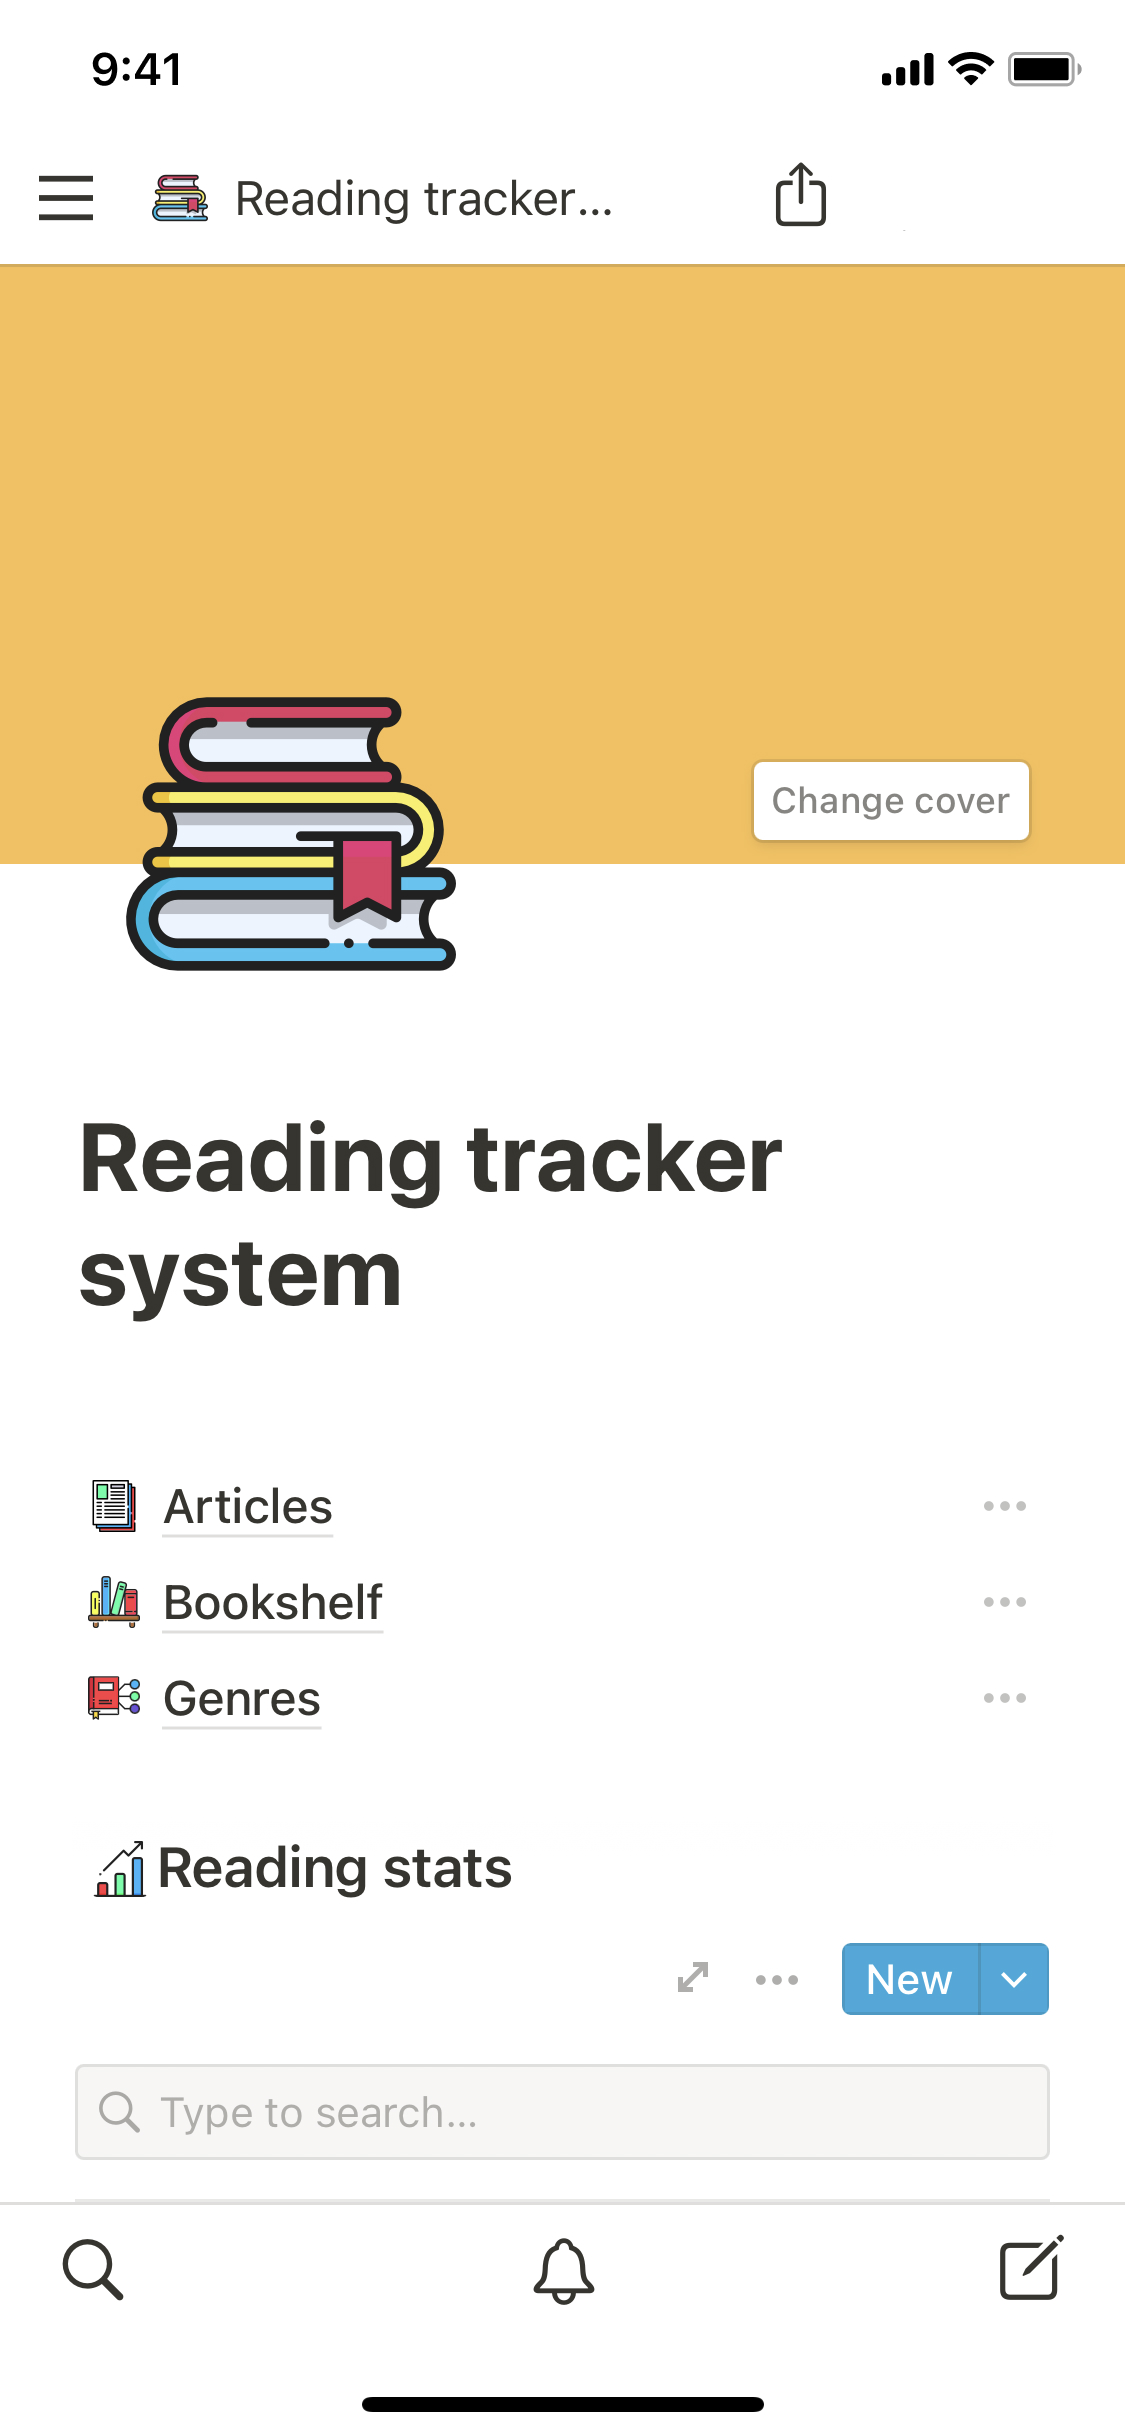 The mobile image for the Reading Tracker System template